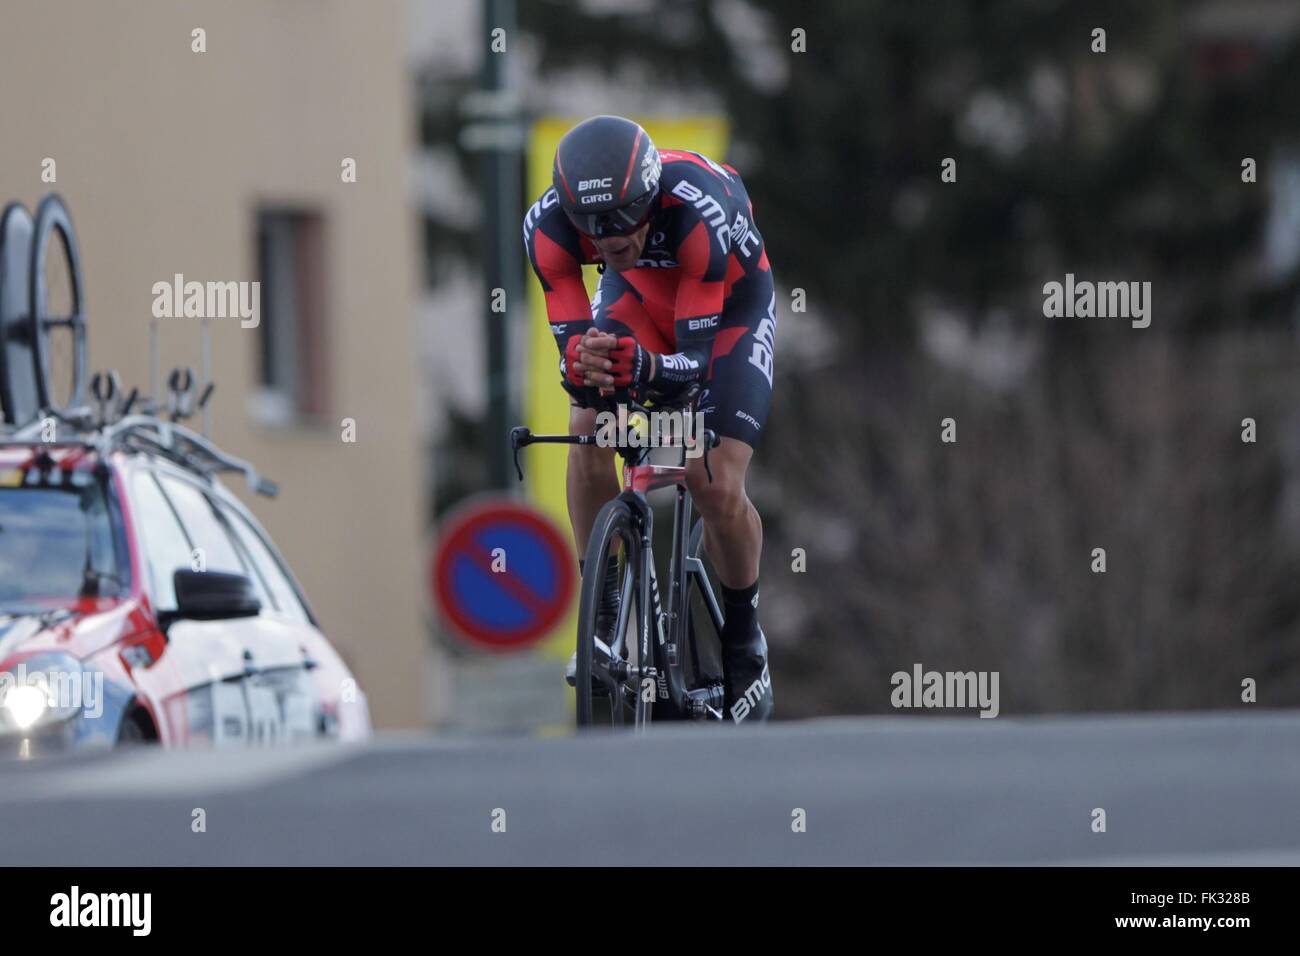 Conflans-Sainte-Honorine, France. 06th Mar, 2016. Amael Moinard (BMC racing Team ) during the prologue of Paris - Nice March 6, 2016 in Conflans-Sainte-Honorine, France Credit:  Laurent Lairys/Agence Locevaphotos/Alamy Live News Stock Photo